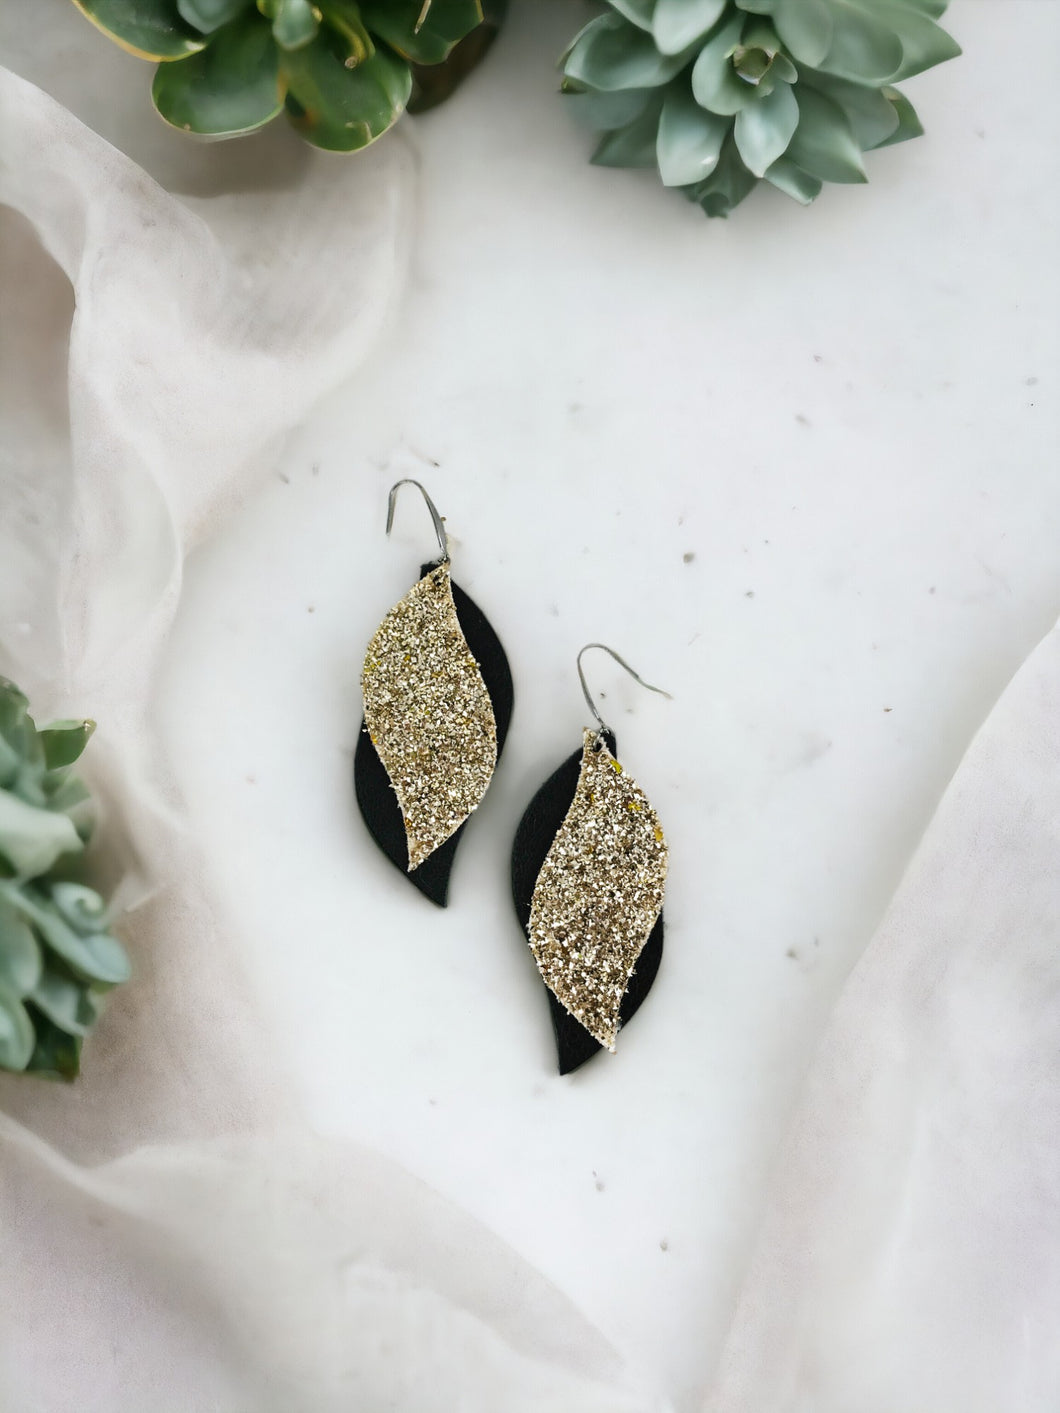 Brown Genuine Leather and Chunky Glitter Earrings - E19-853